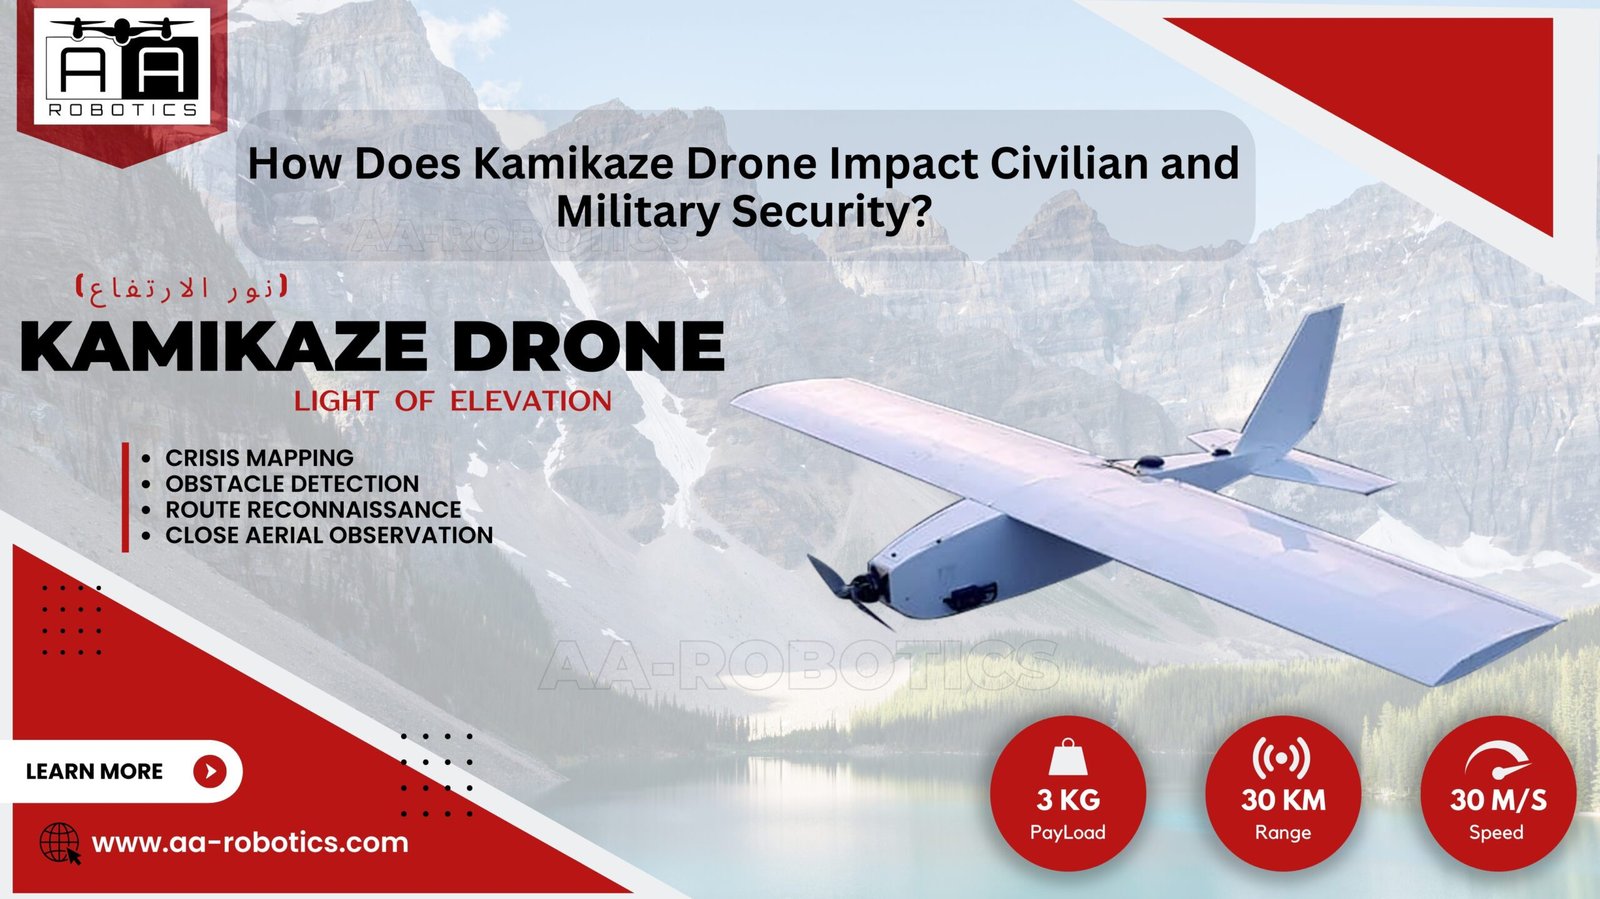 How Does Kamikaze Drone Impact Civilian and Military Security?